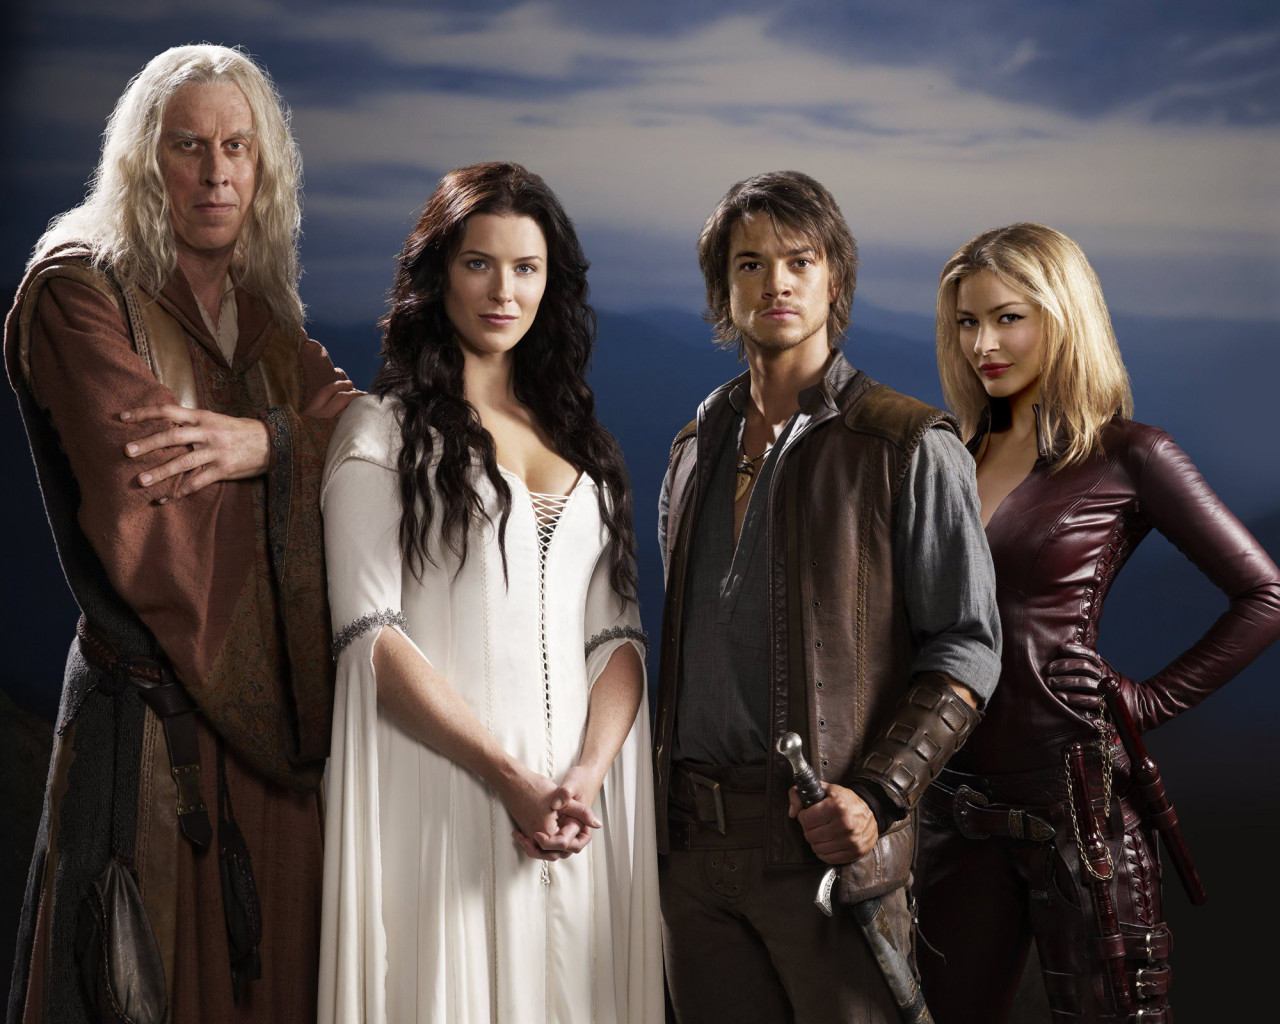 The legend of the seeker